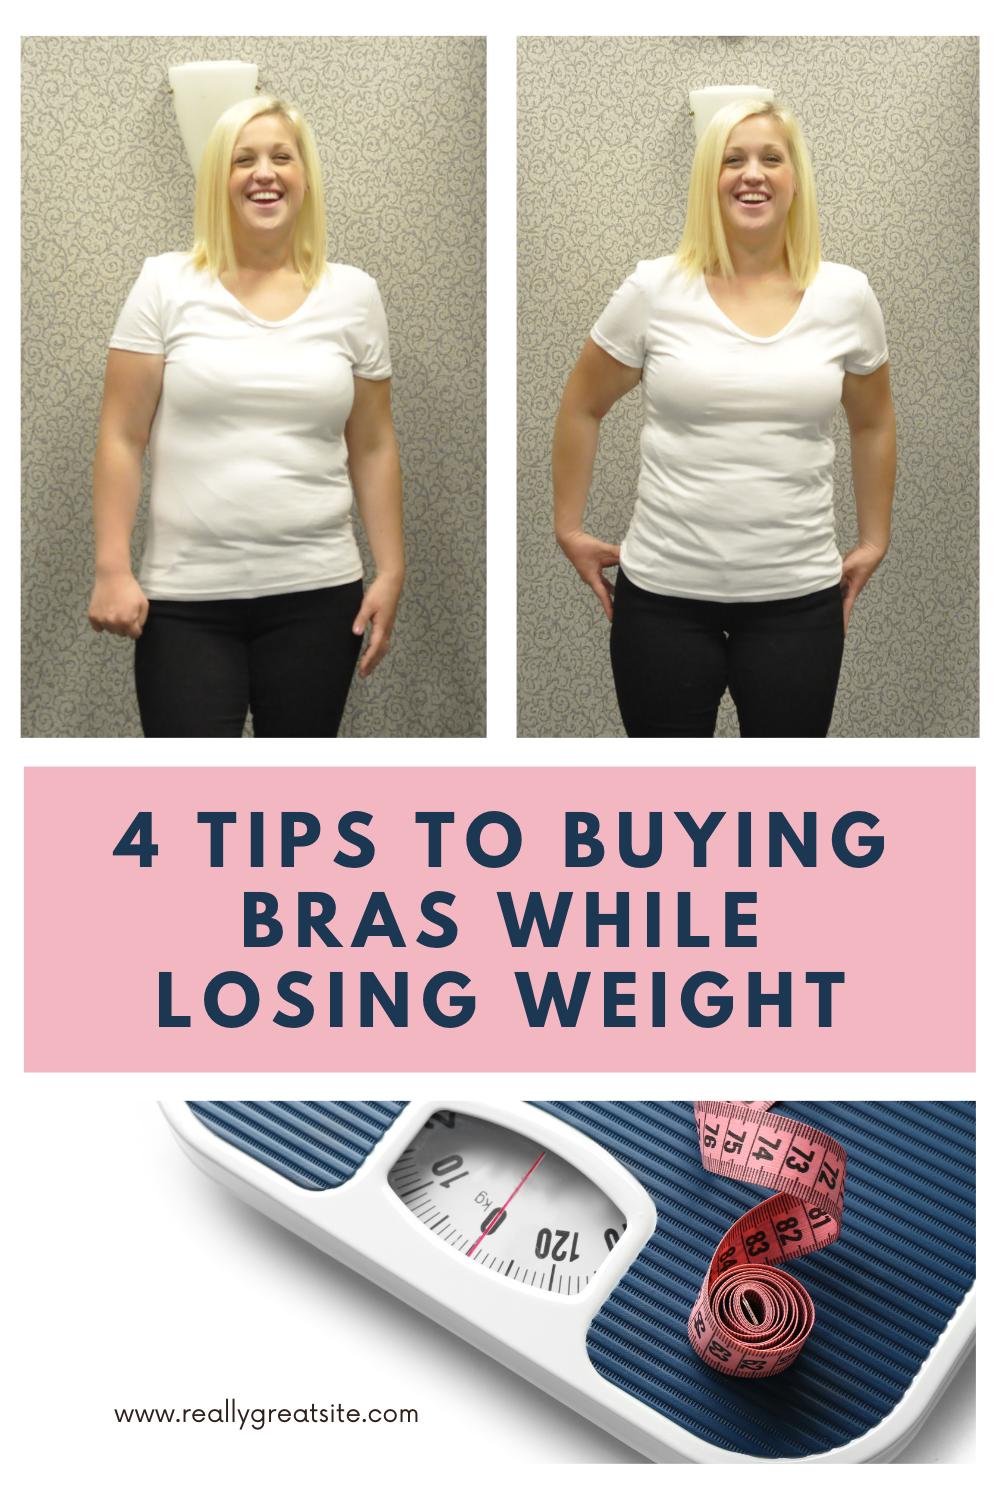 Bra Fit Before & After: The Bra That Was Too Big 